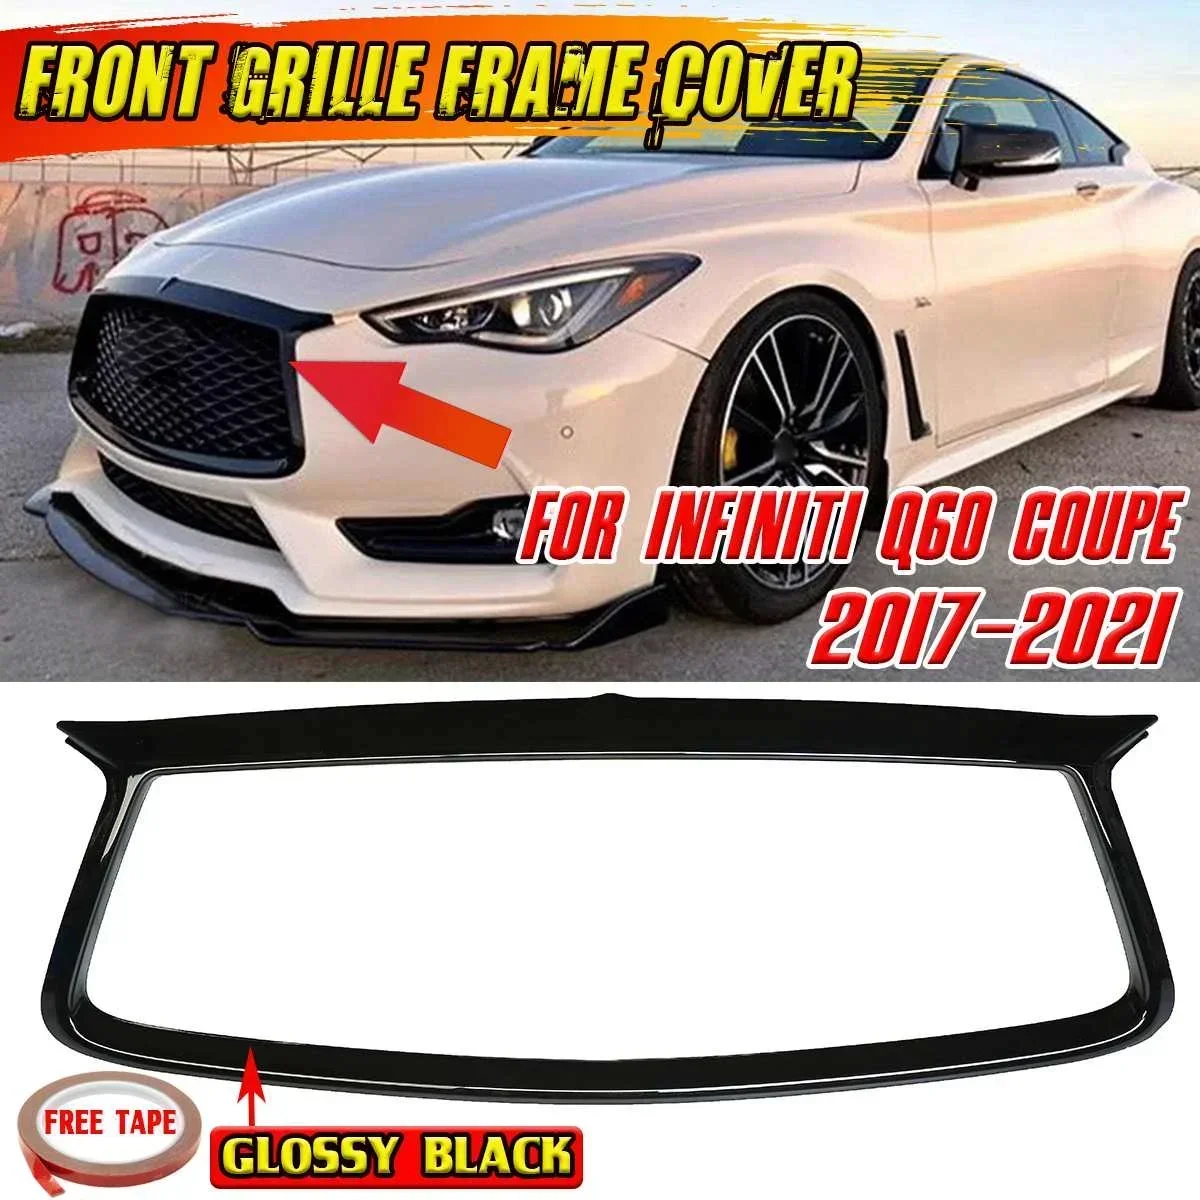 

Q60 Car Front Bumper Grille Trim Overlay Cover Frame For Infiniti Q60 Coupe 2017-2021 Add On Racing Grill Outline Trim Body Kit